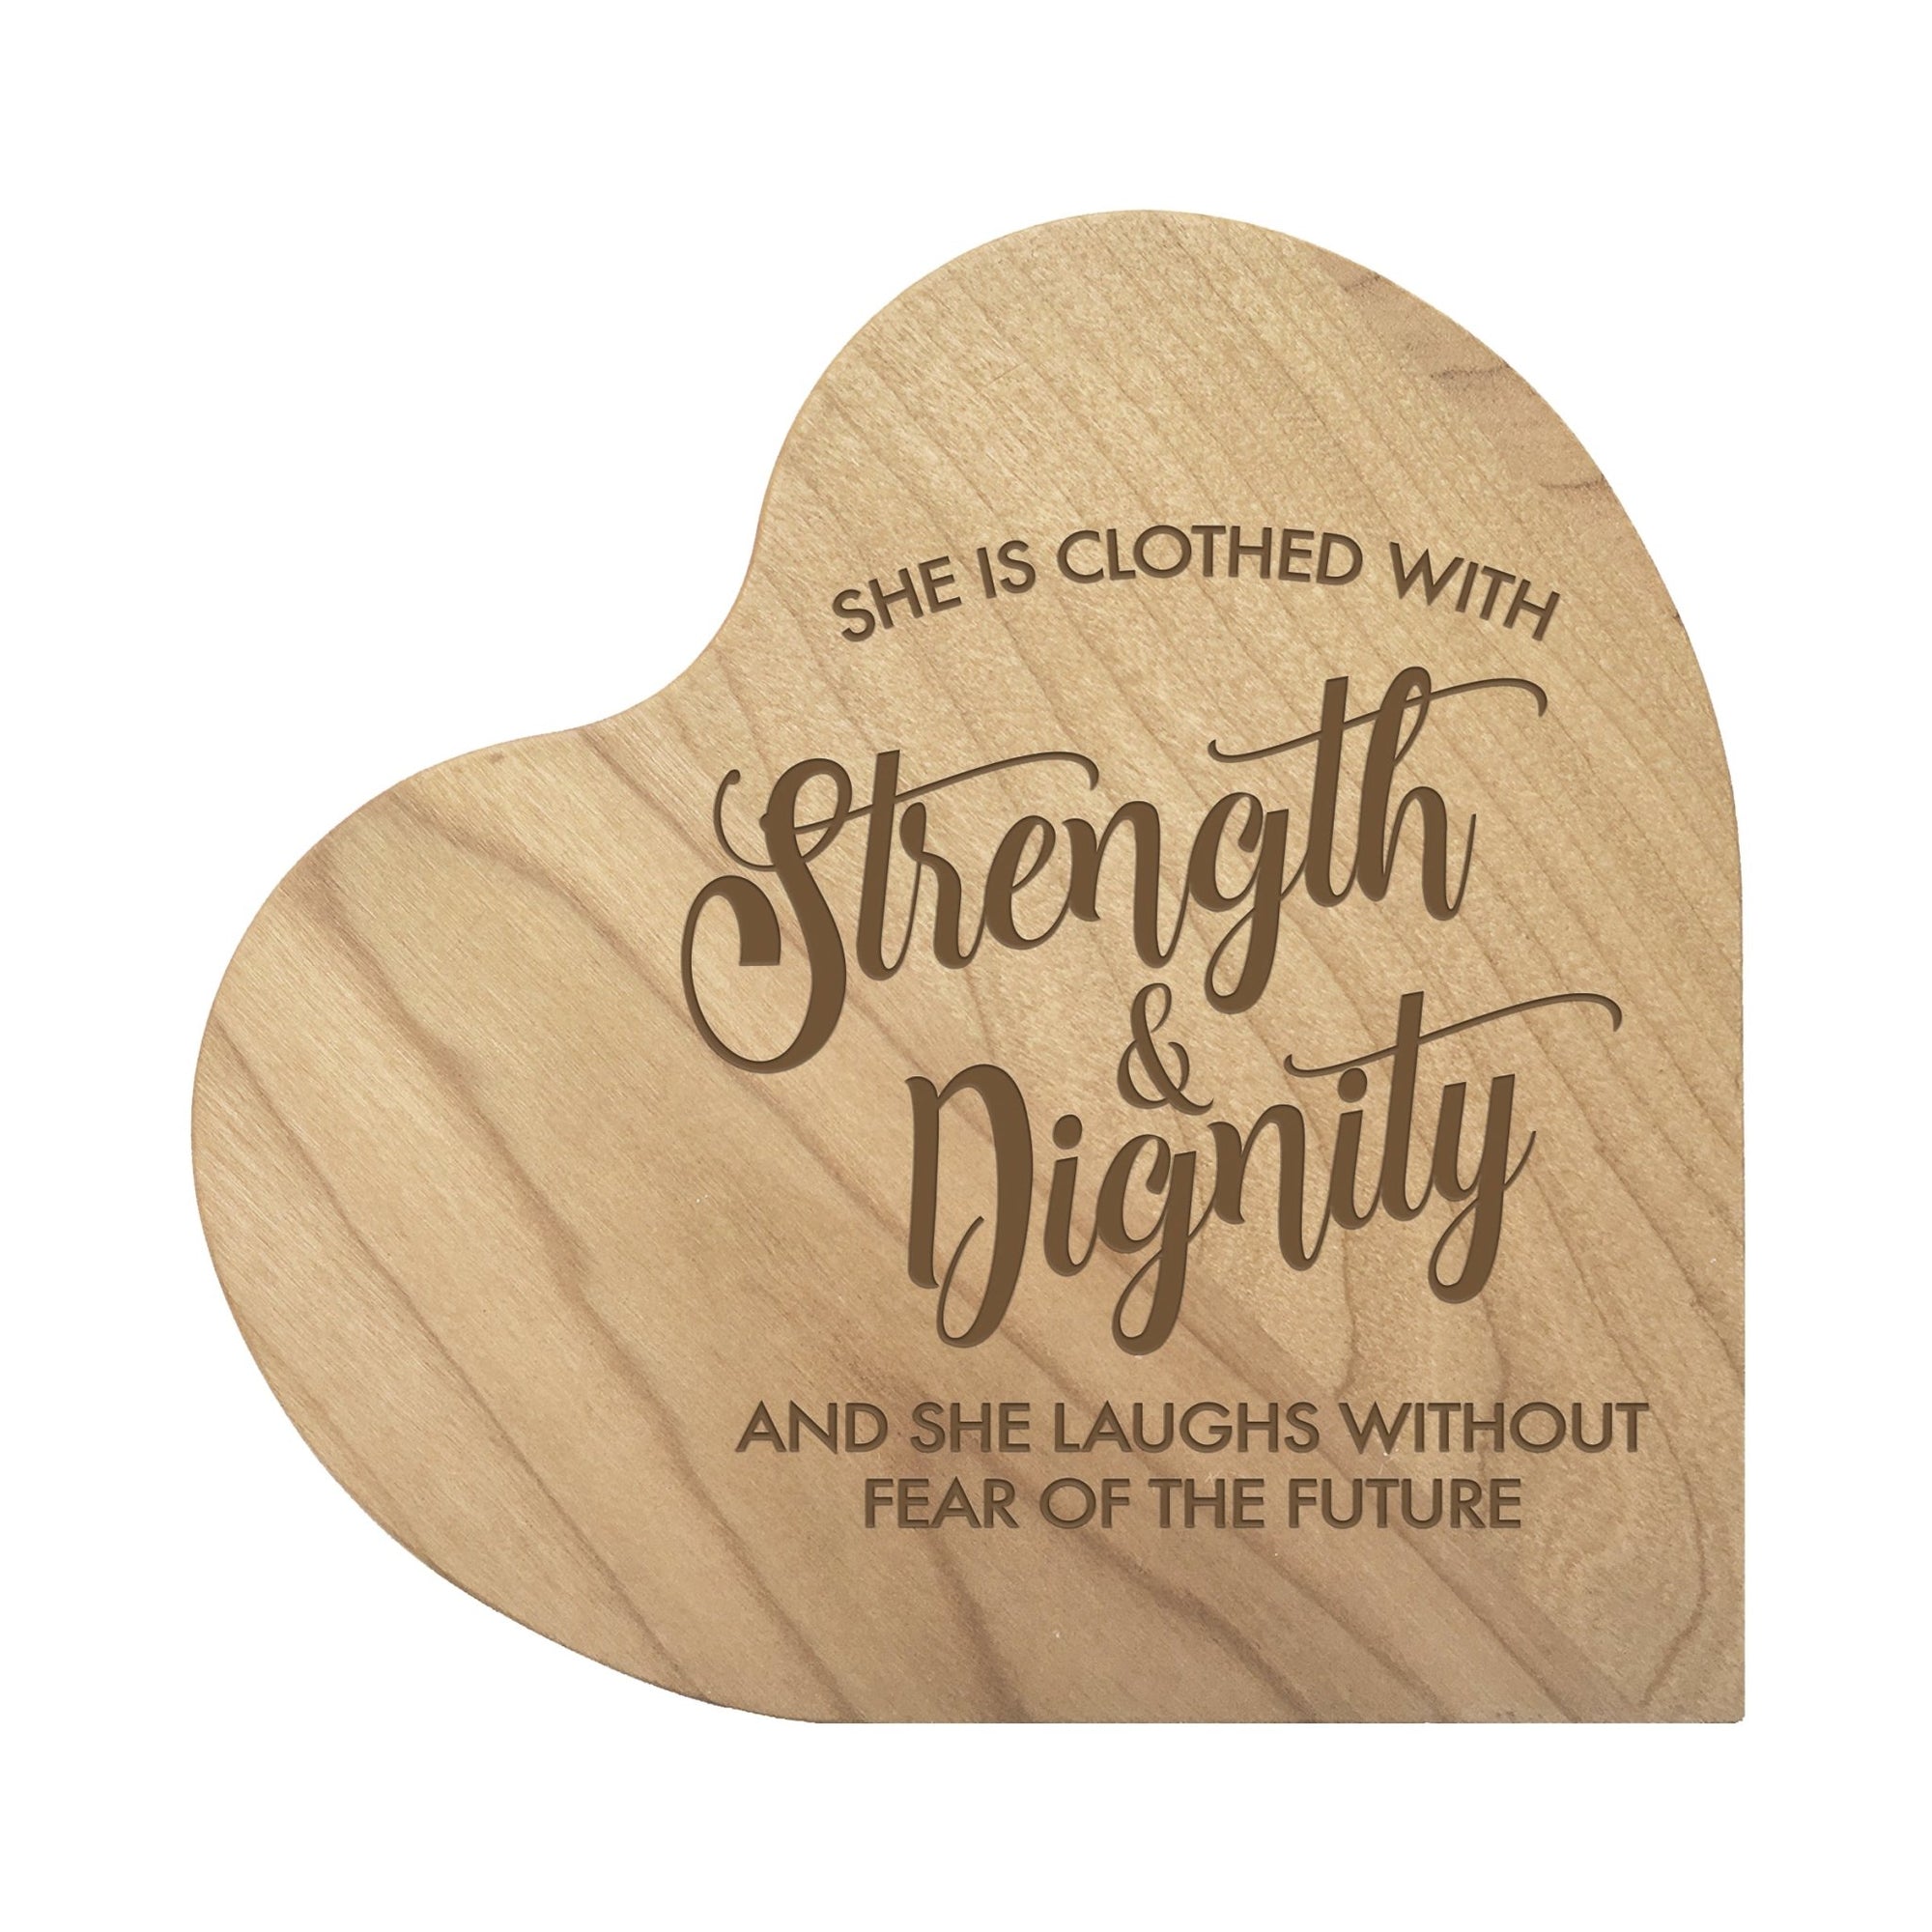 Engraved Wooden Heart Block 5” x 5.25” x 0.75”- Strength And Dignity - LifeSong Milestones